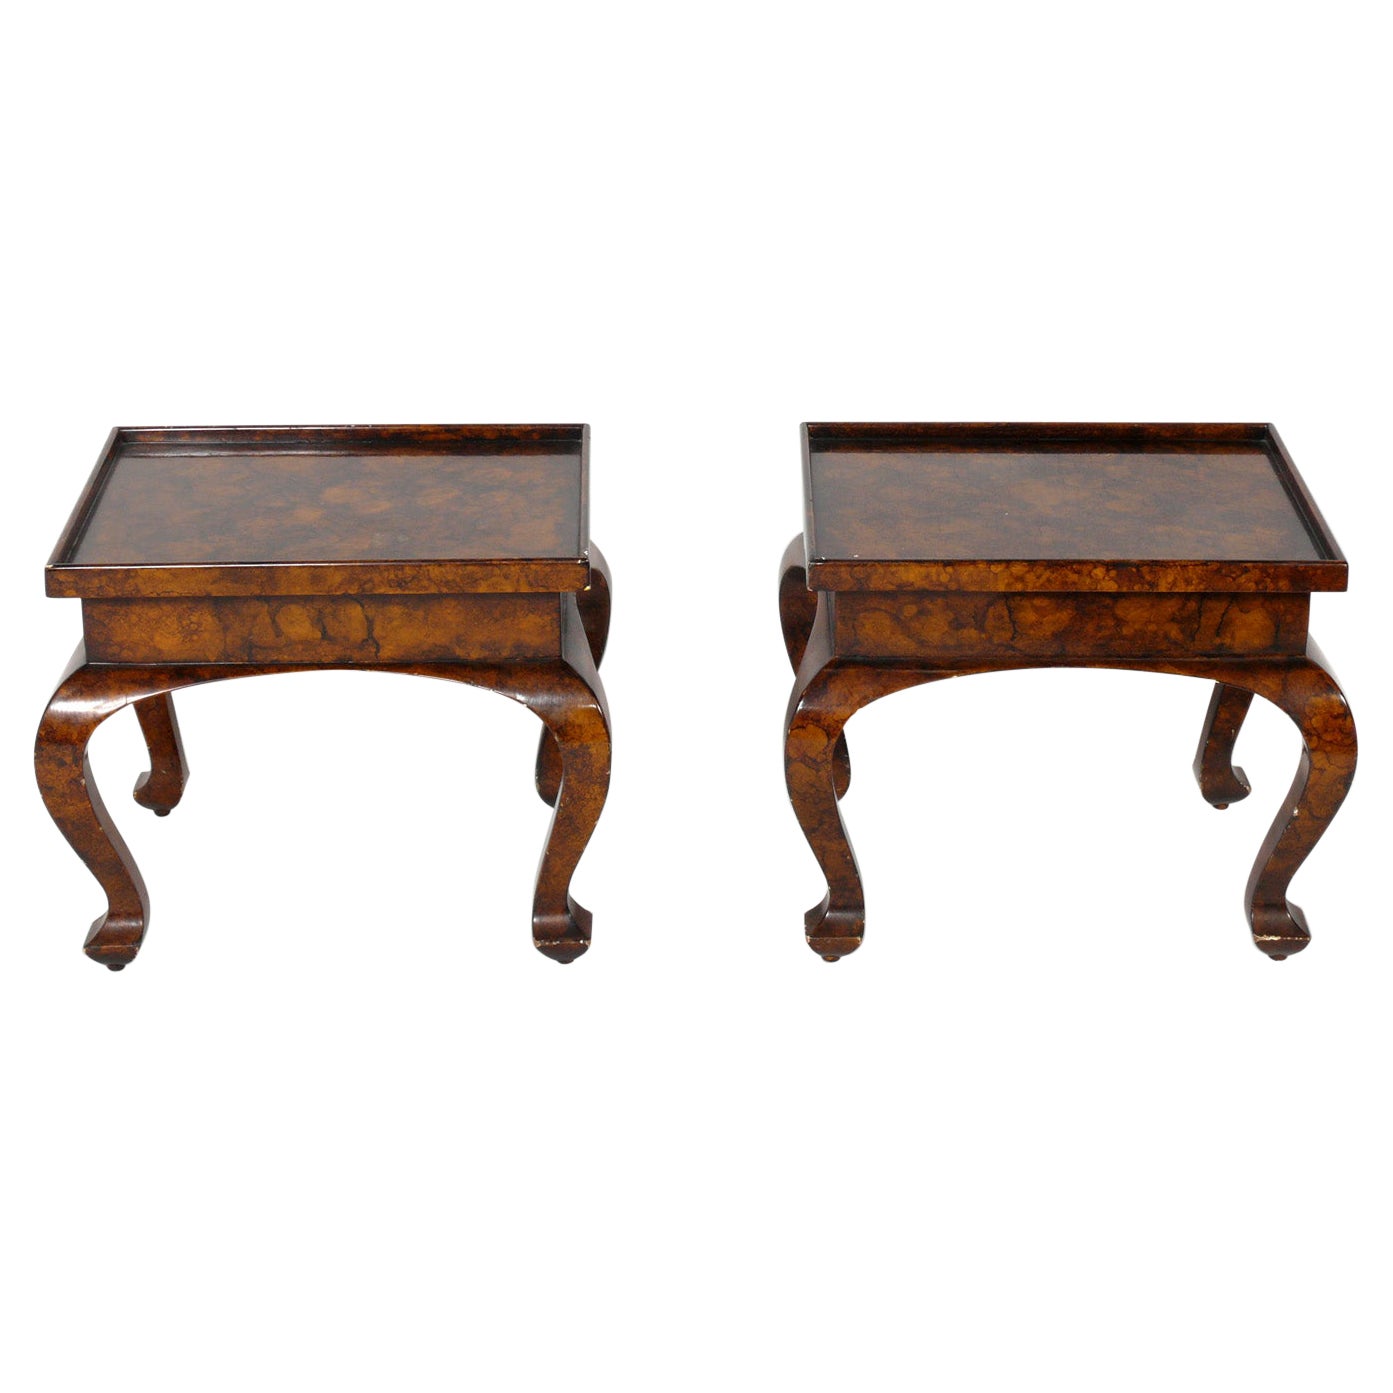 Pair of Petite Faux Tortoiseshell End Tables For Sale